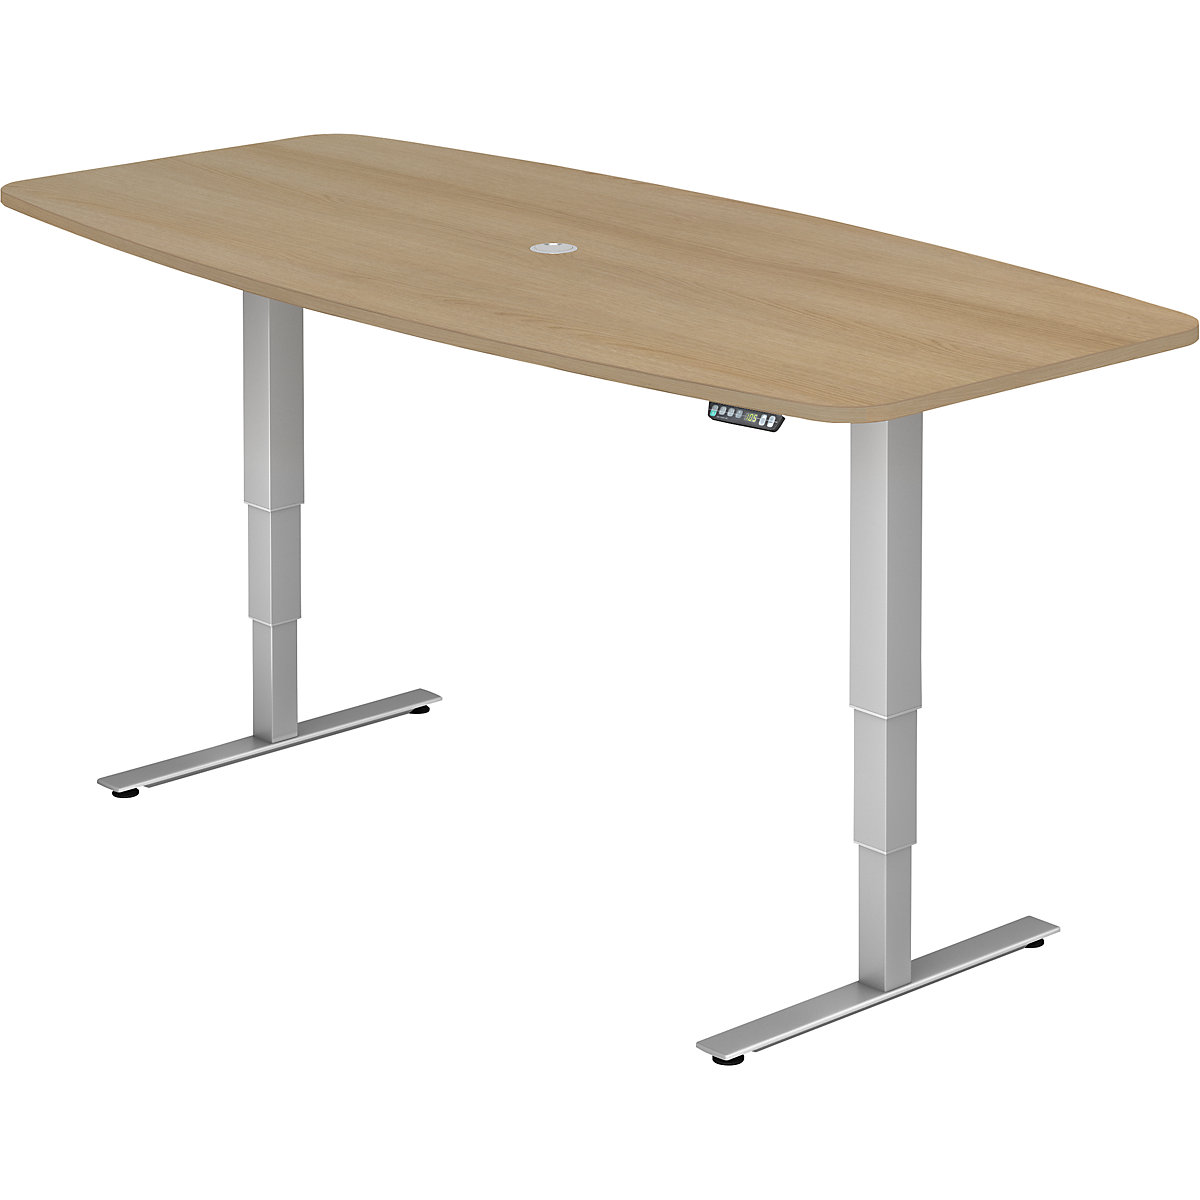 Conference table, WxD 2200 x 1030 mm, electric height adjustment from 620 – 1270 mm, oak finish-7